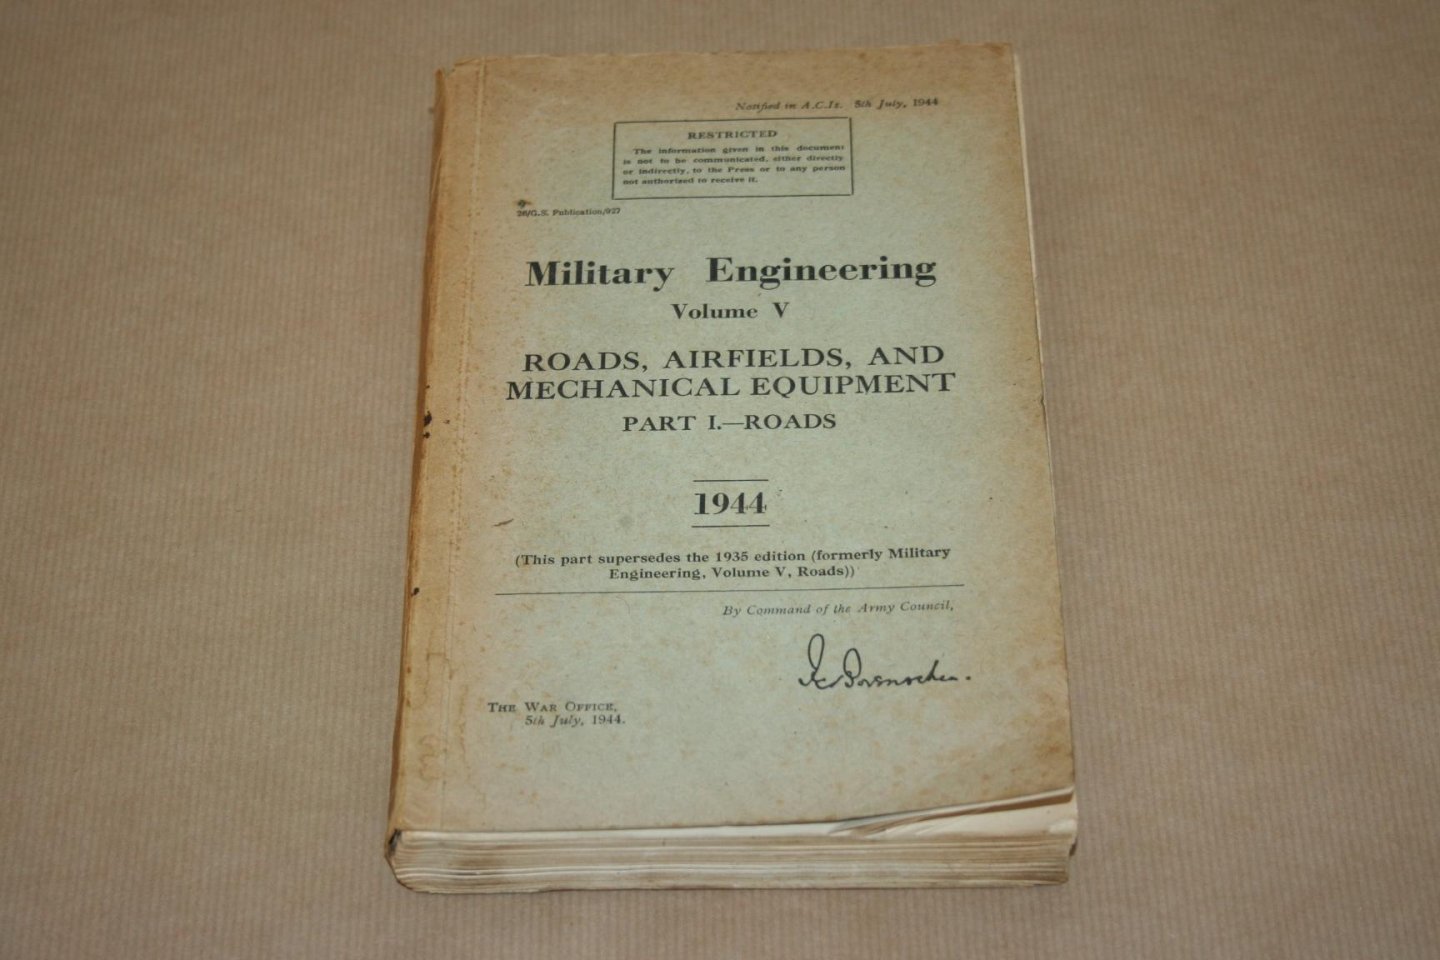  - Military Engineering  - Volume V: Roads, airfields and mechanical equipment